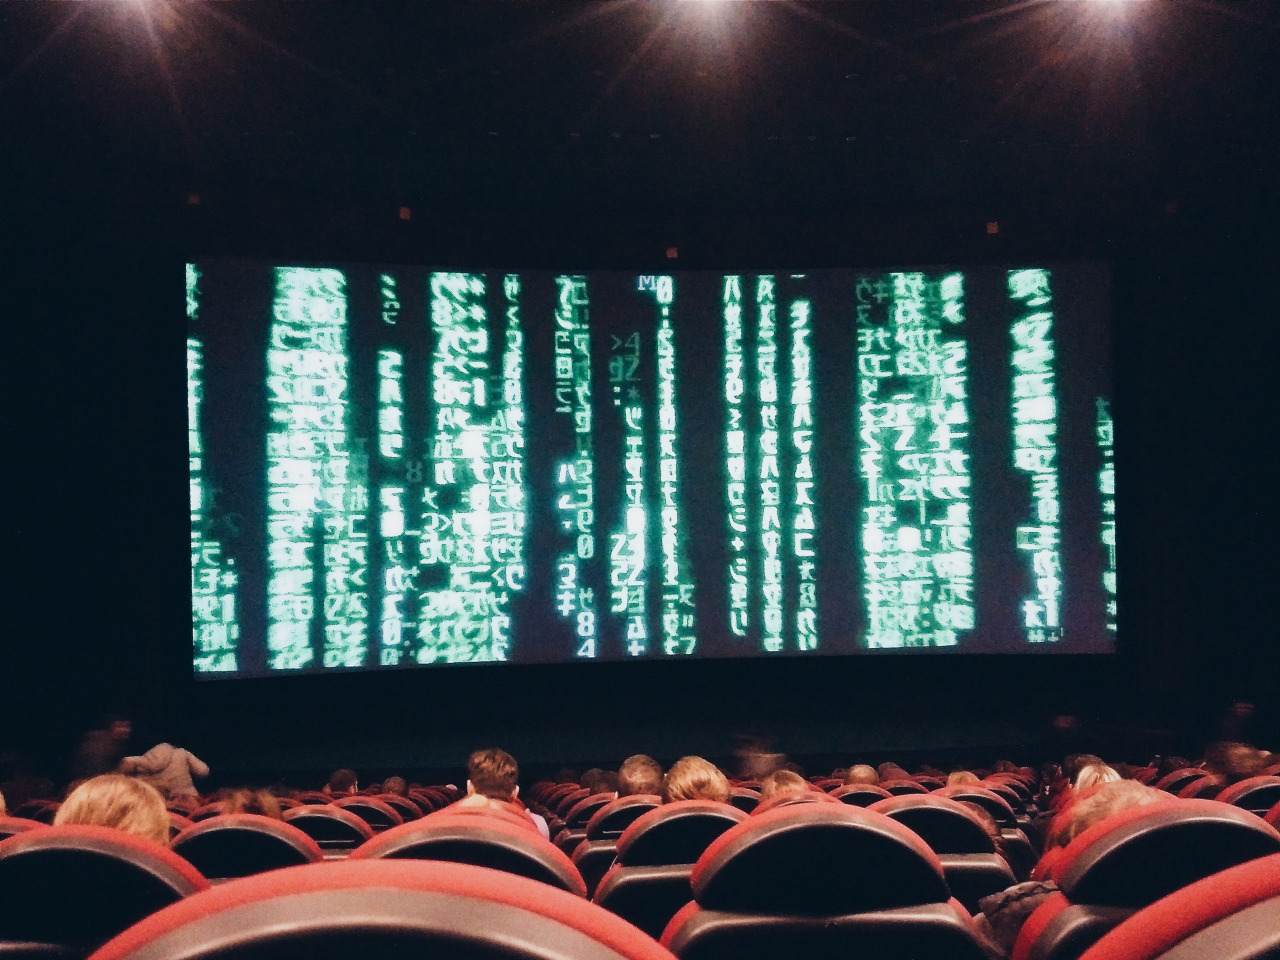 How long have you enjoyed watching your favorite movie on the big screen? - View, Cinema, Nostalgia, Movies, Matrix